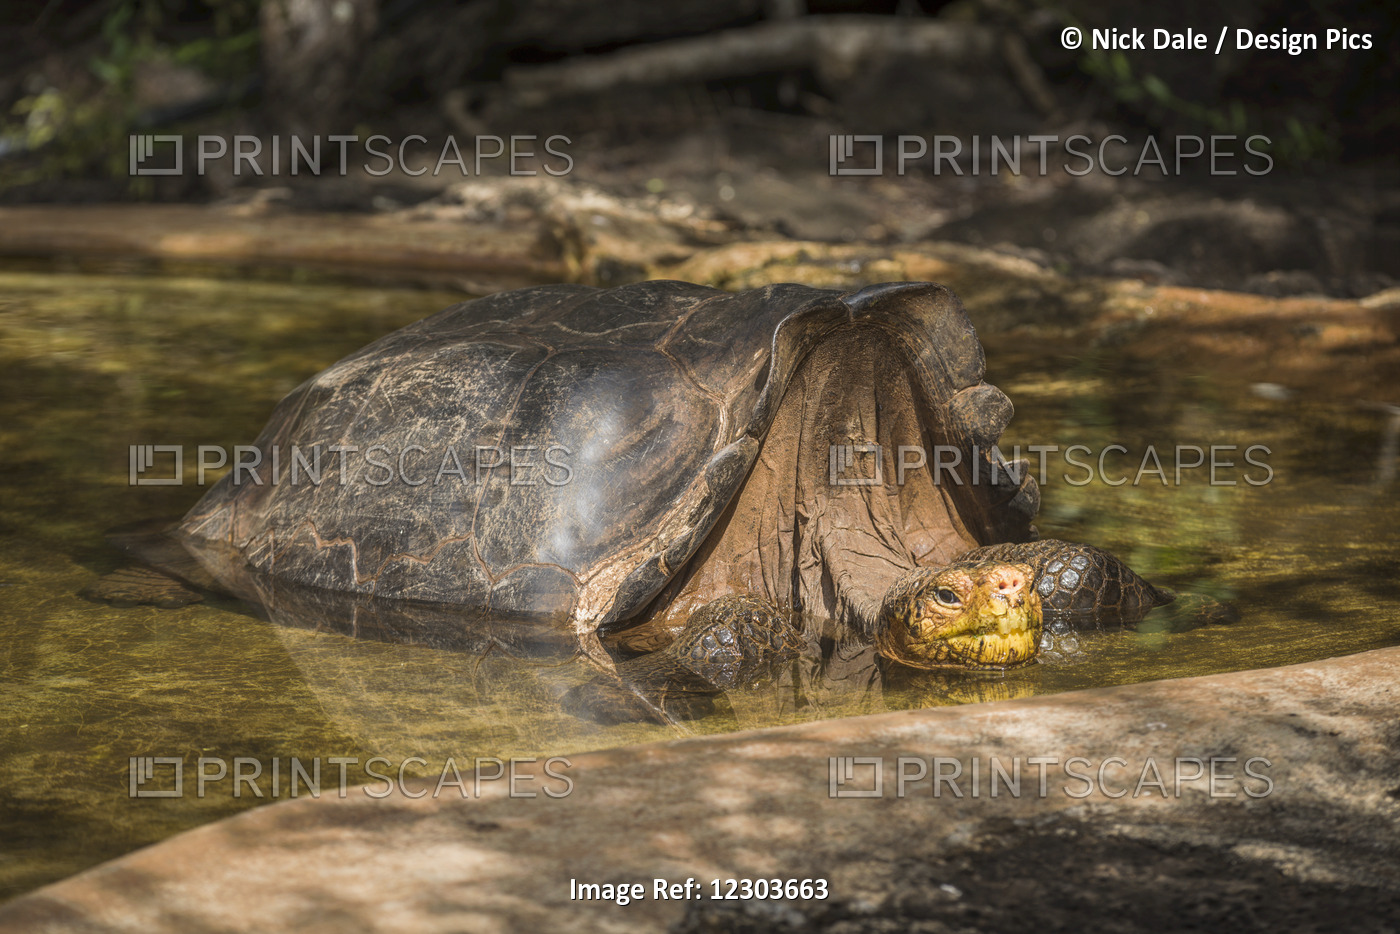 Galapagos Giant Tortoise (Geochelone Hoodensis) In Artificial Concrete Pool; ...